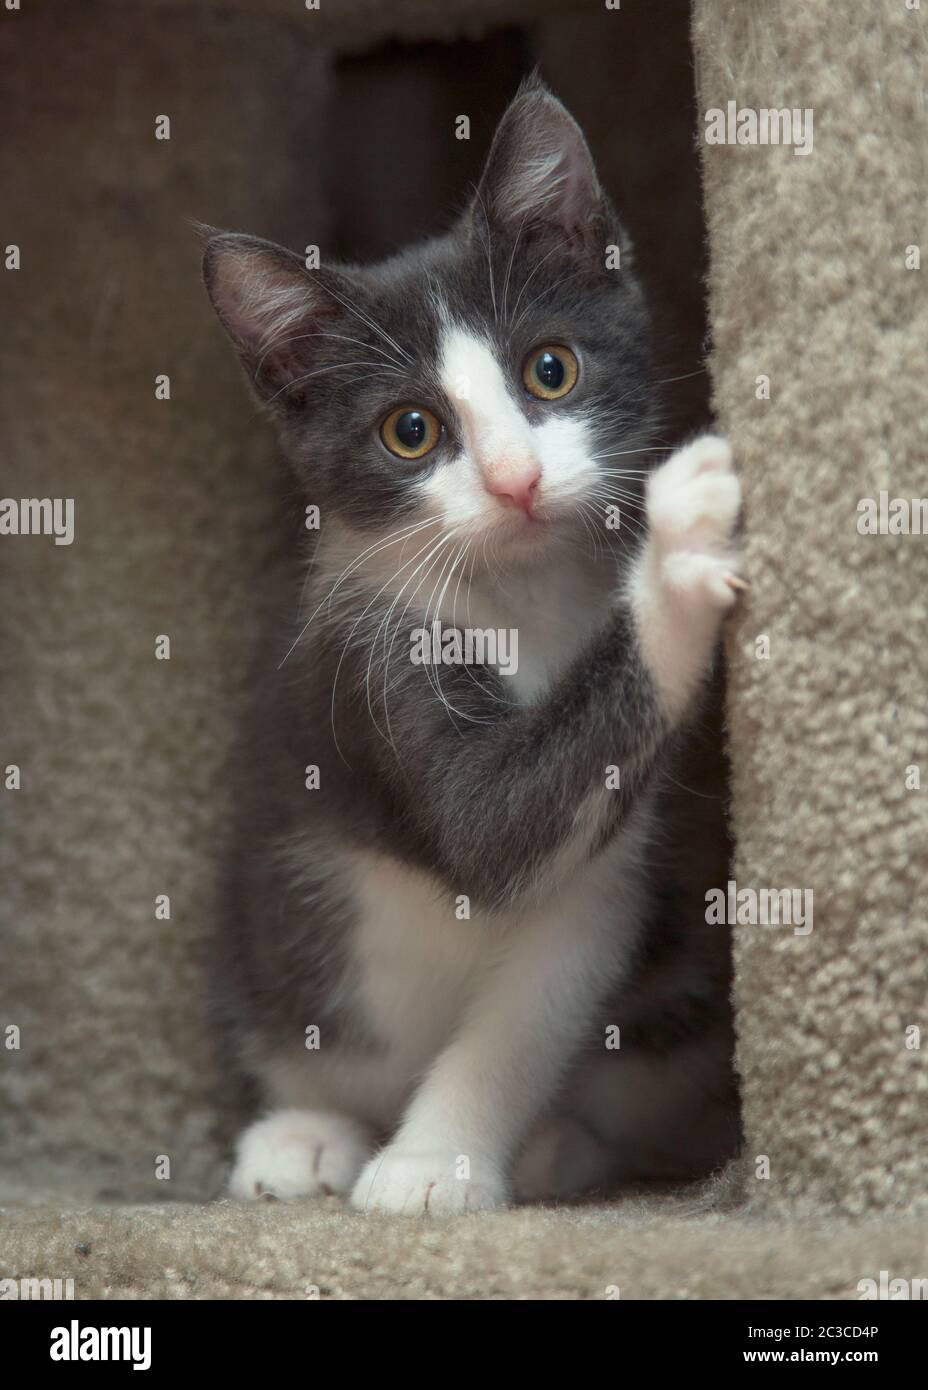 Portrait of a fuzzy little grey and white kitten Stock Photo